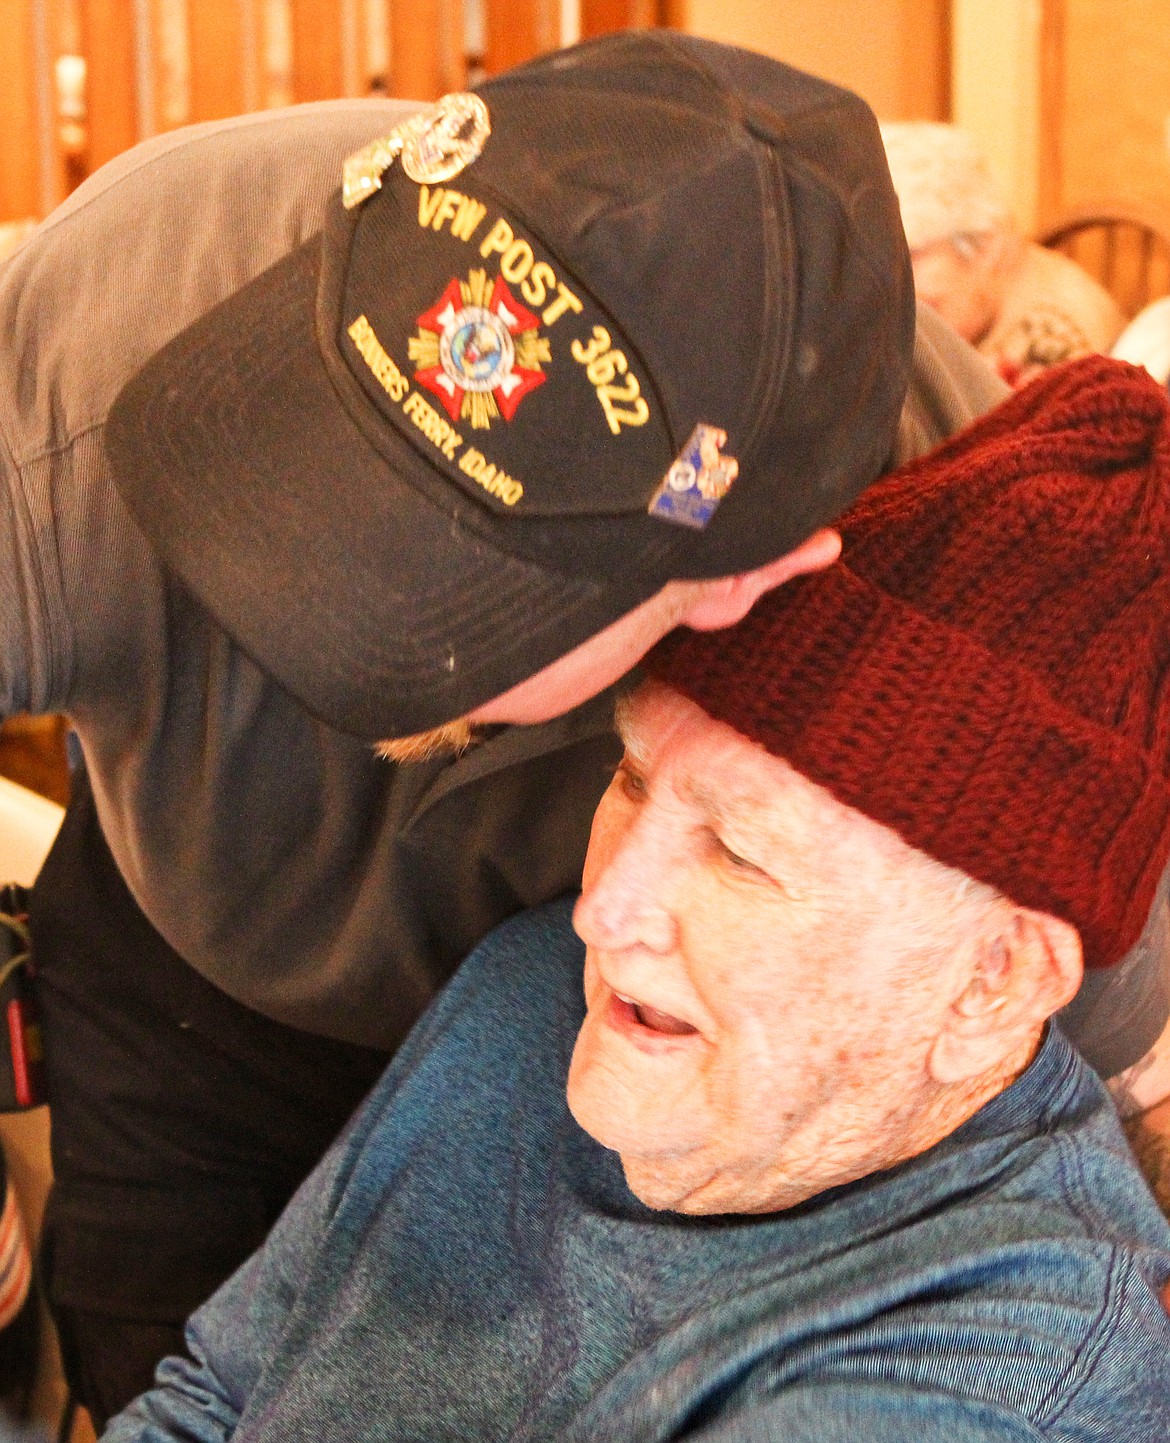 Photo by TONIA BROOKS
Tom Cheney, after handing out warm blankets and handmade knitted hats to Restorium former first responders and military veterans, supplied the attendees with warm hugs.